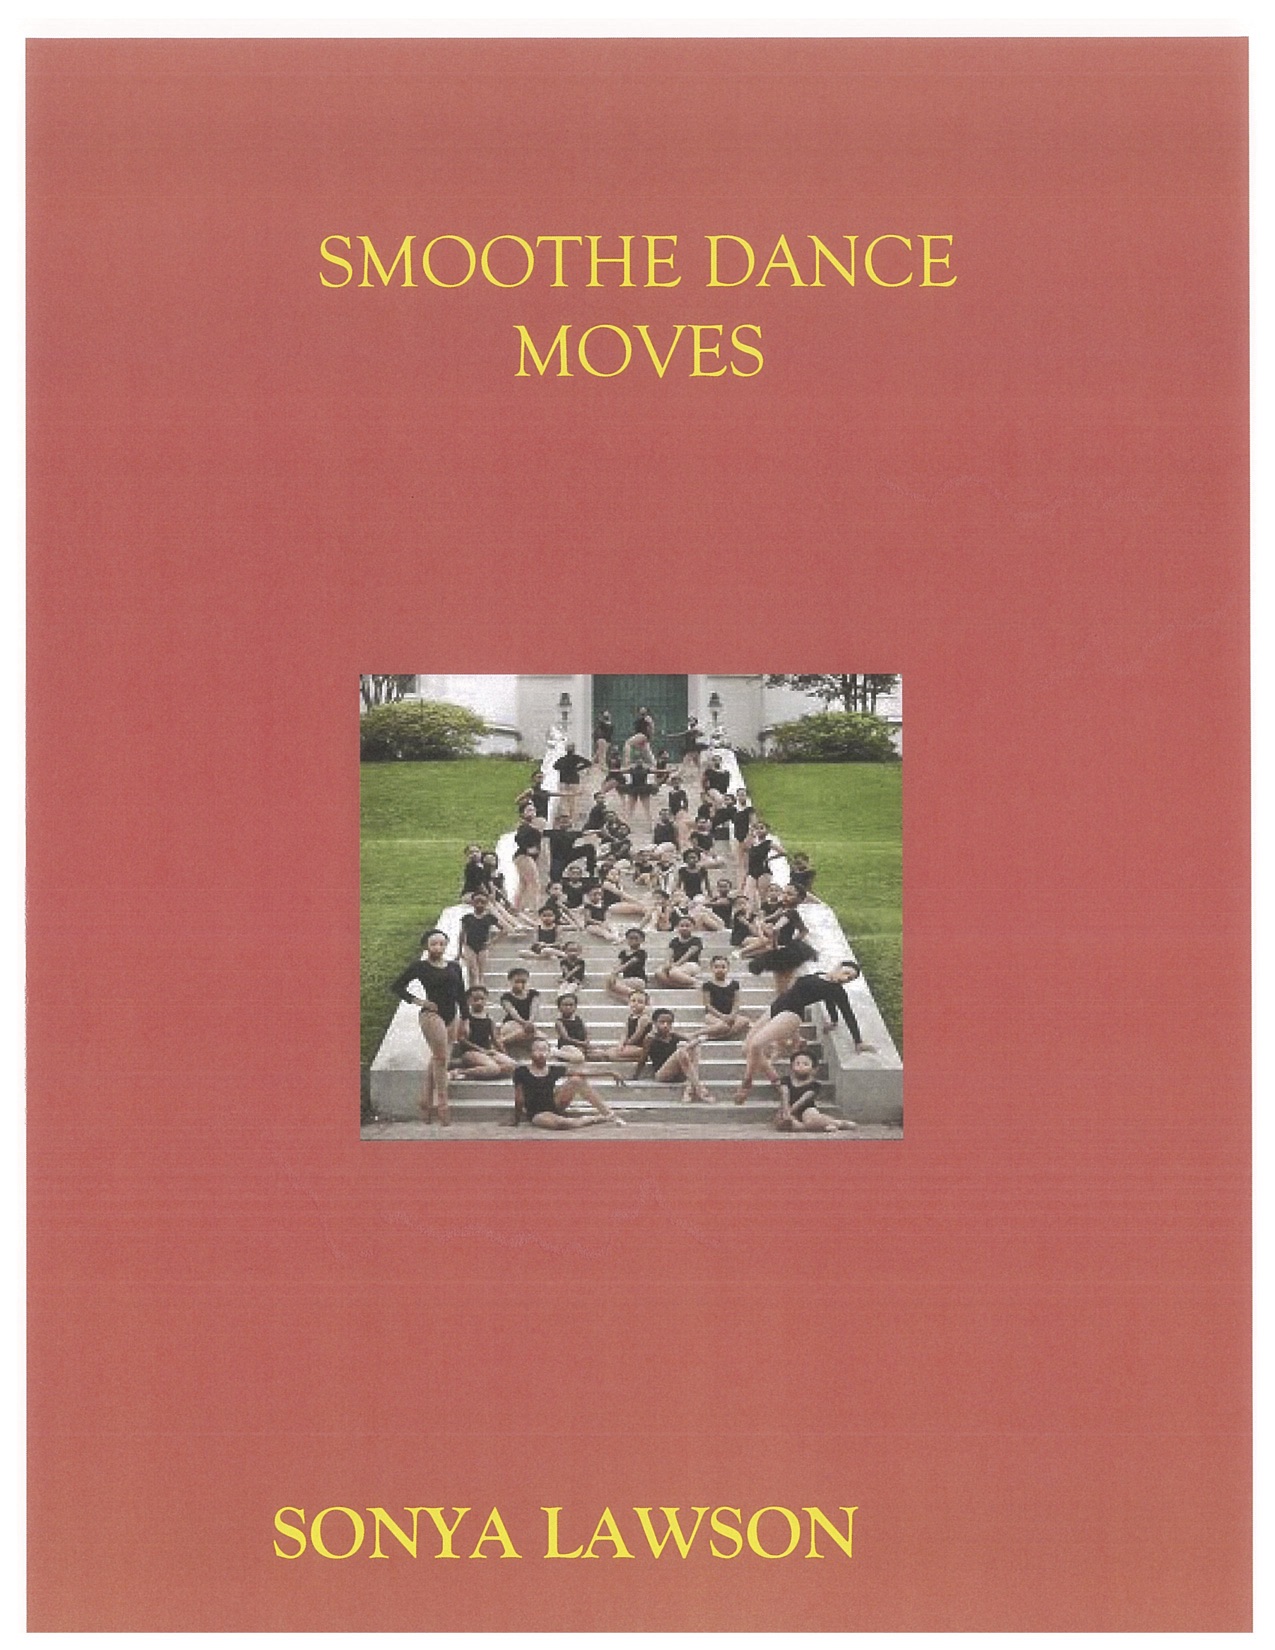 The cover page of my chapbook has the author's name an introduction to the dances.